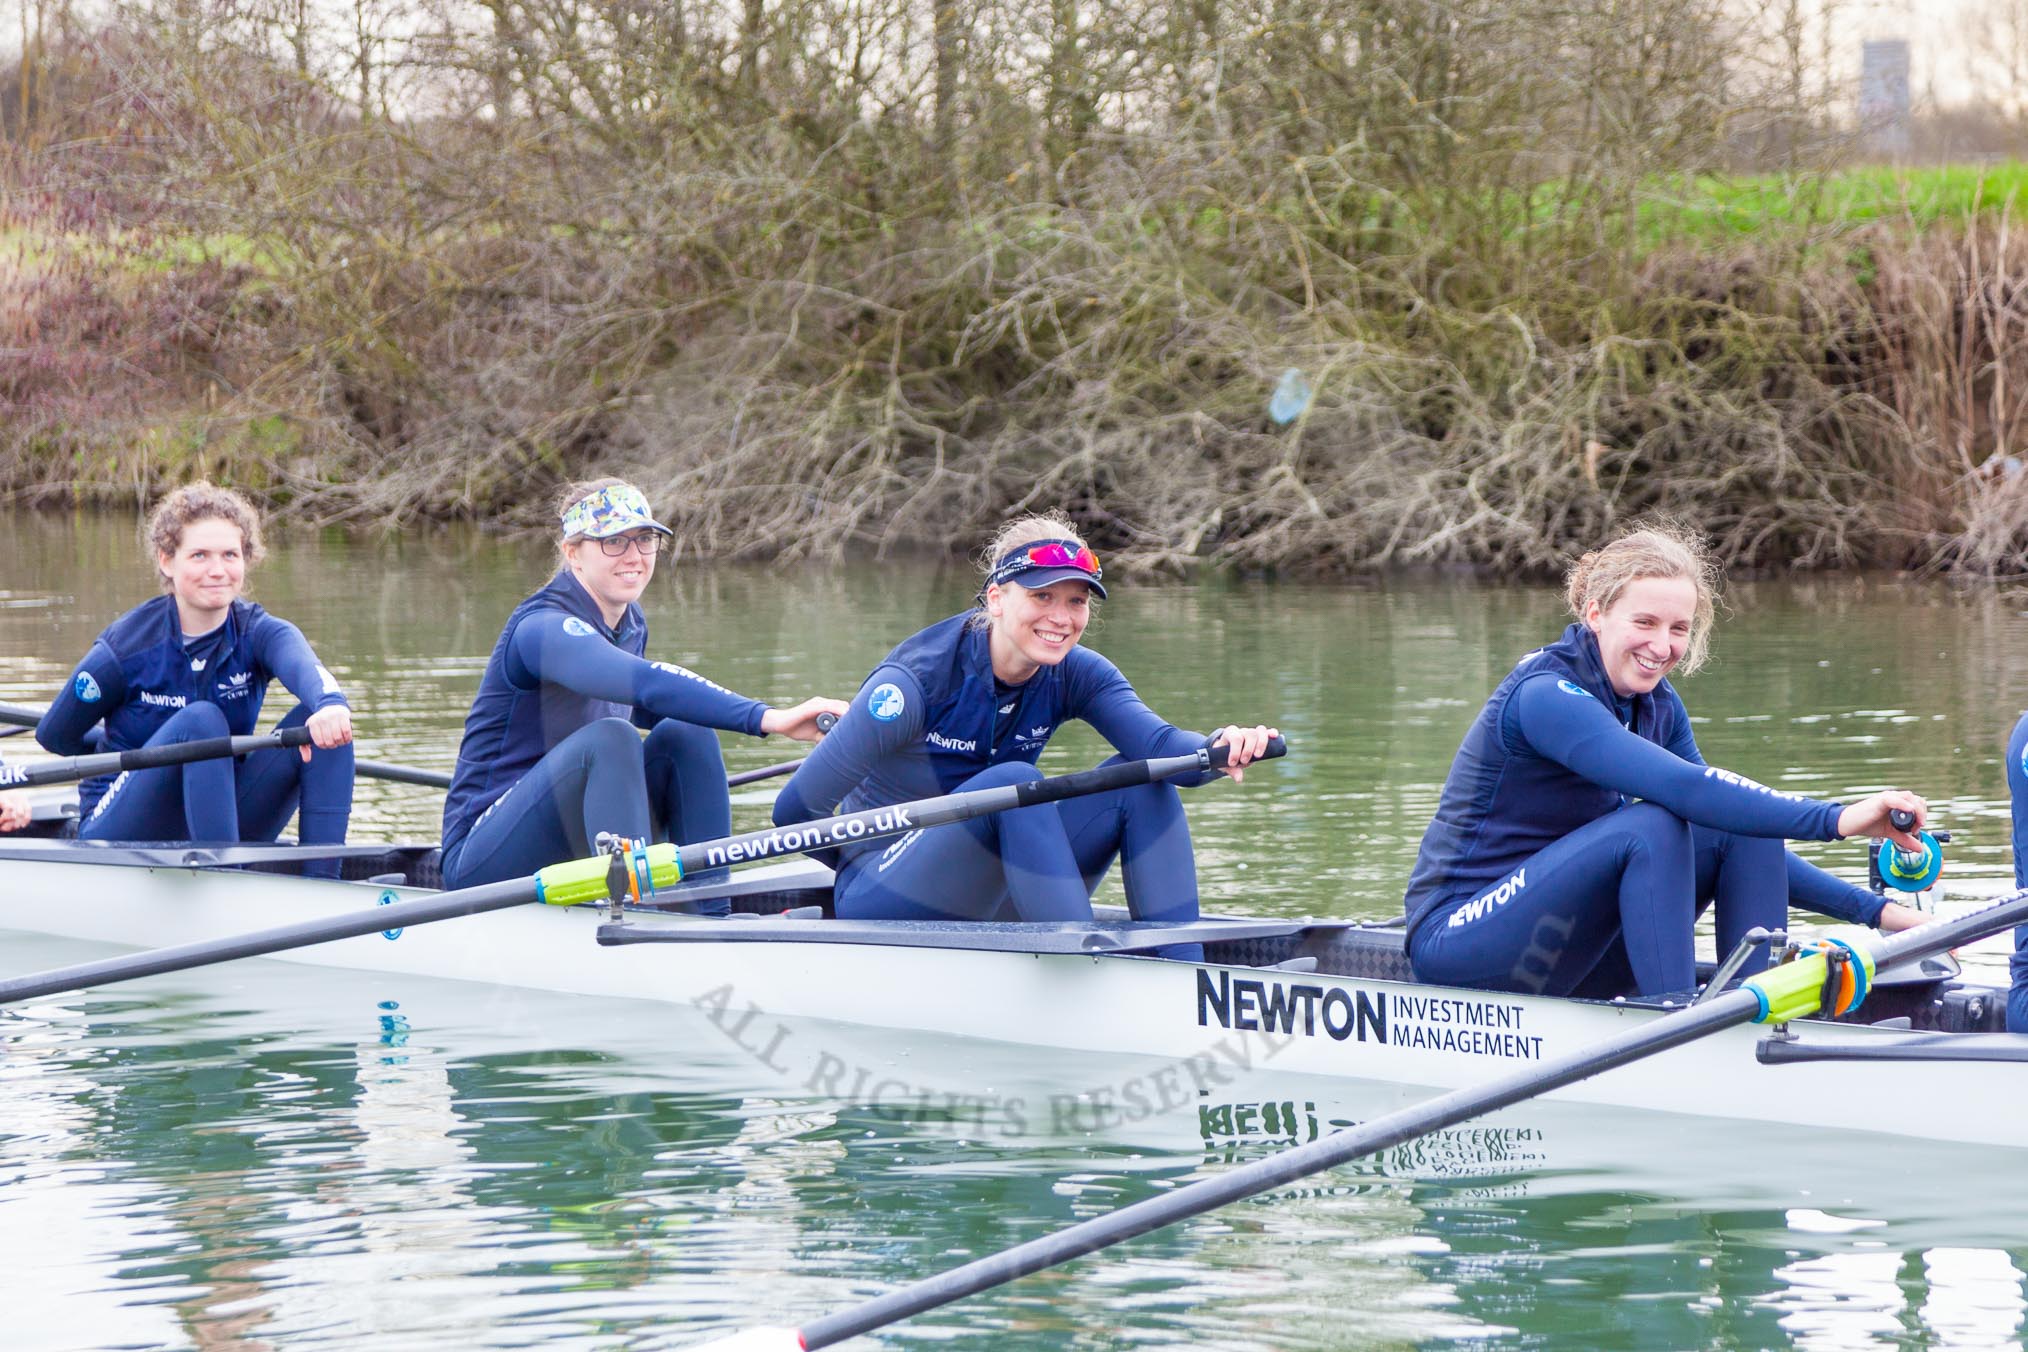 The Boat Race season 2016 - OUWBC training Wallingford: At the start of the OUWBC Blue Boat training session - Joanne Jansen, Ruth Siddorn, Elo Luik and Anastasia Chitty.
River Thames,
Wallingford,
Oxfordshire,

on 29 February 2016 at 15:46, image #56